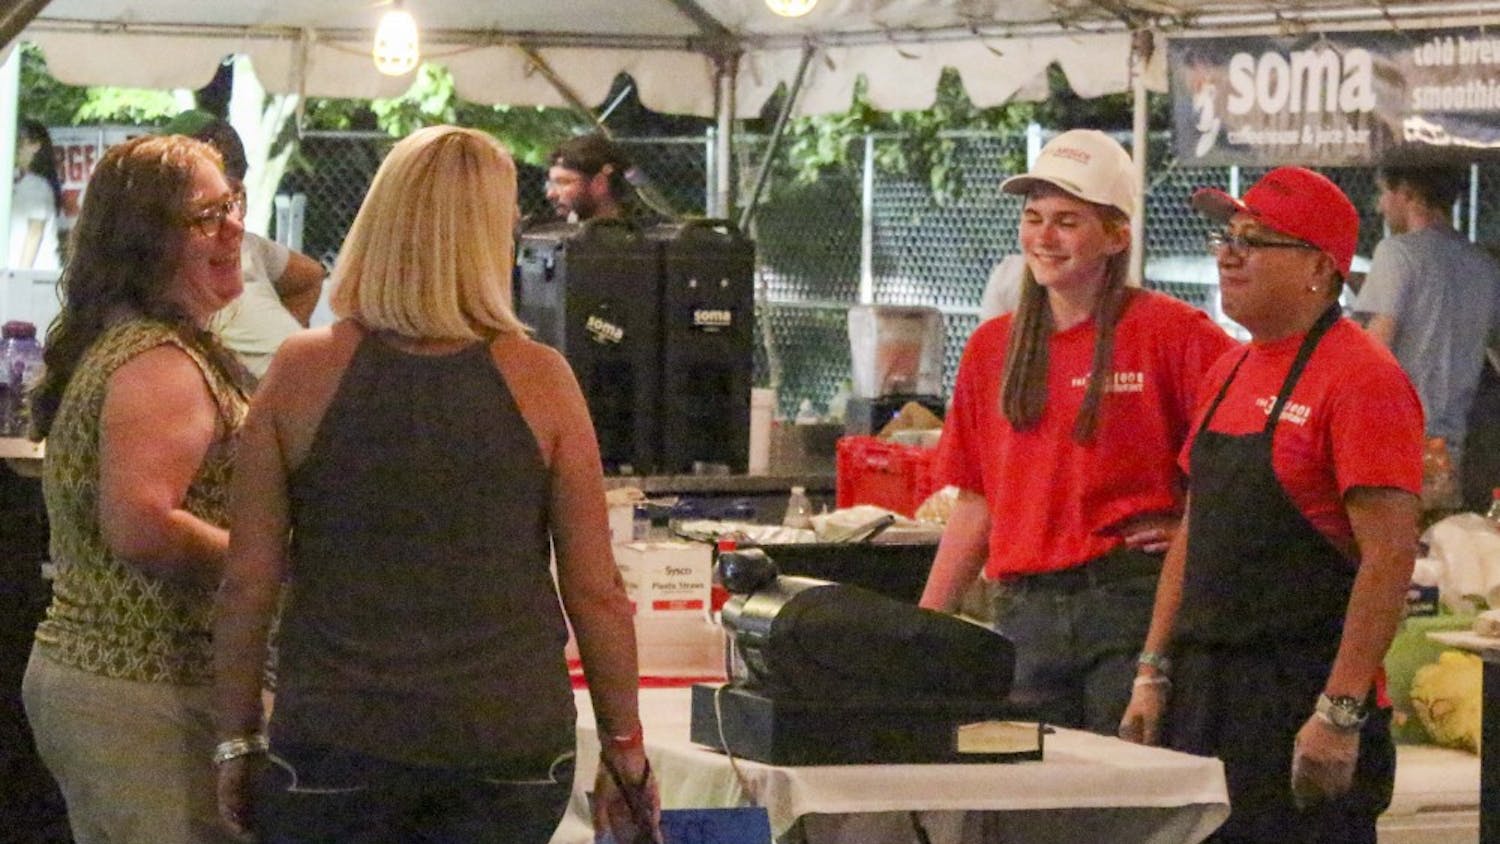 People participate in the Taste of Bloomington at Saturday evening at Showers Common. This event brought together many restaurants, wineries and breweries in Bloomington.